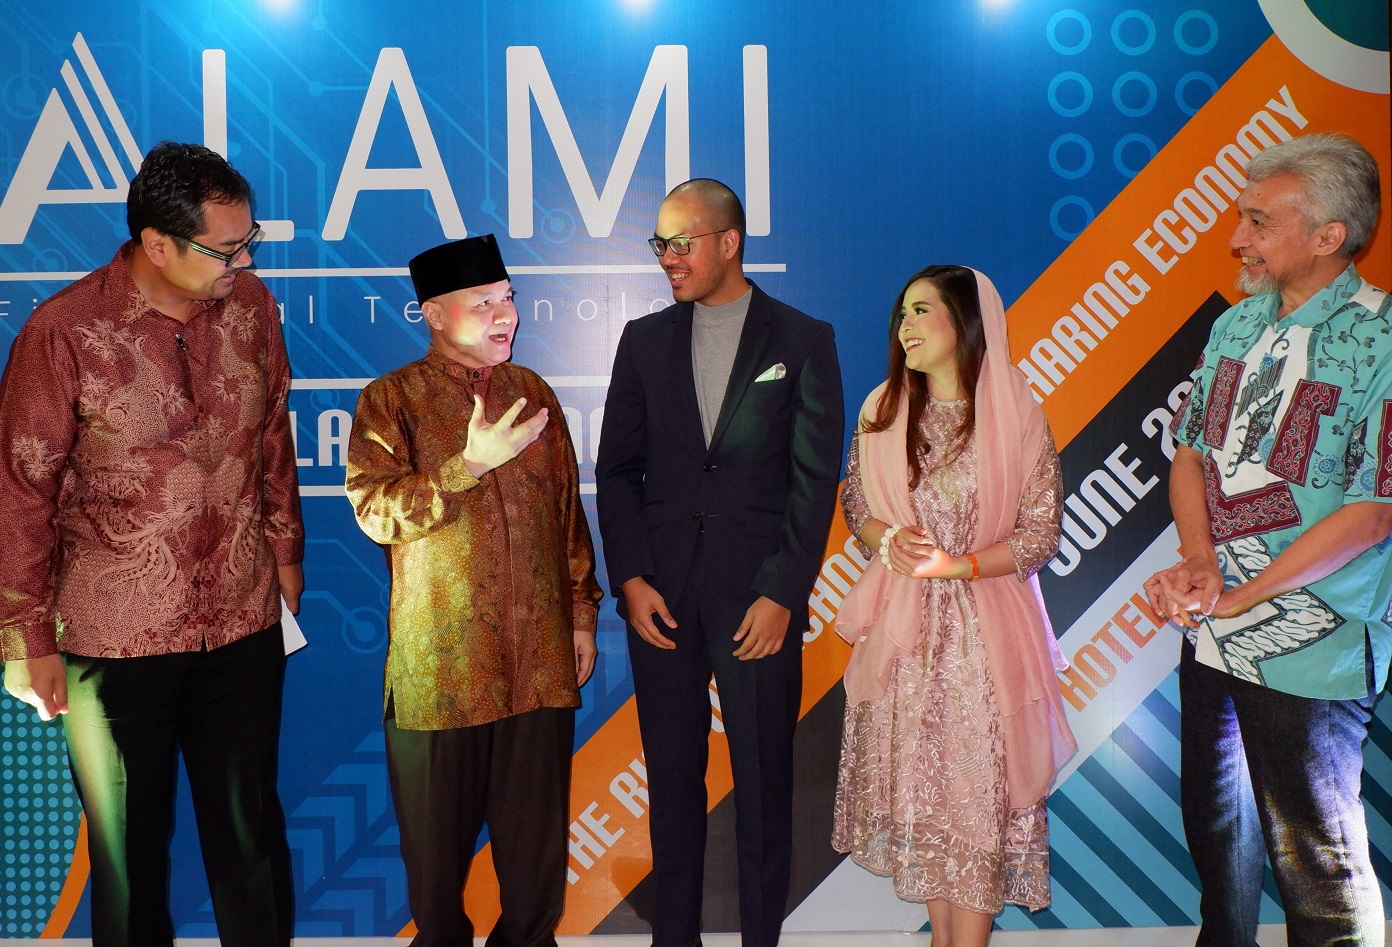 Alami aims to revolutionise Indonesia’s syariah finance industry